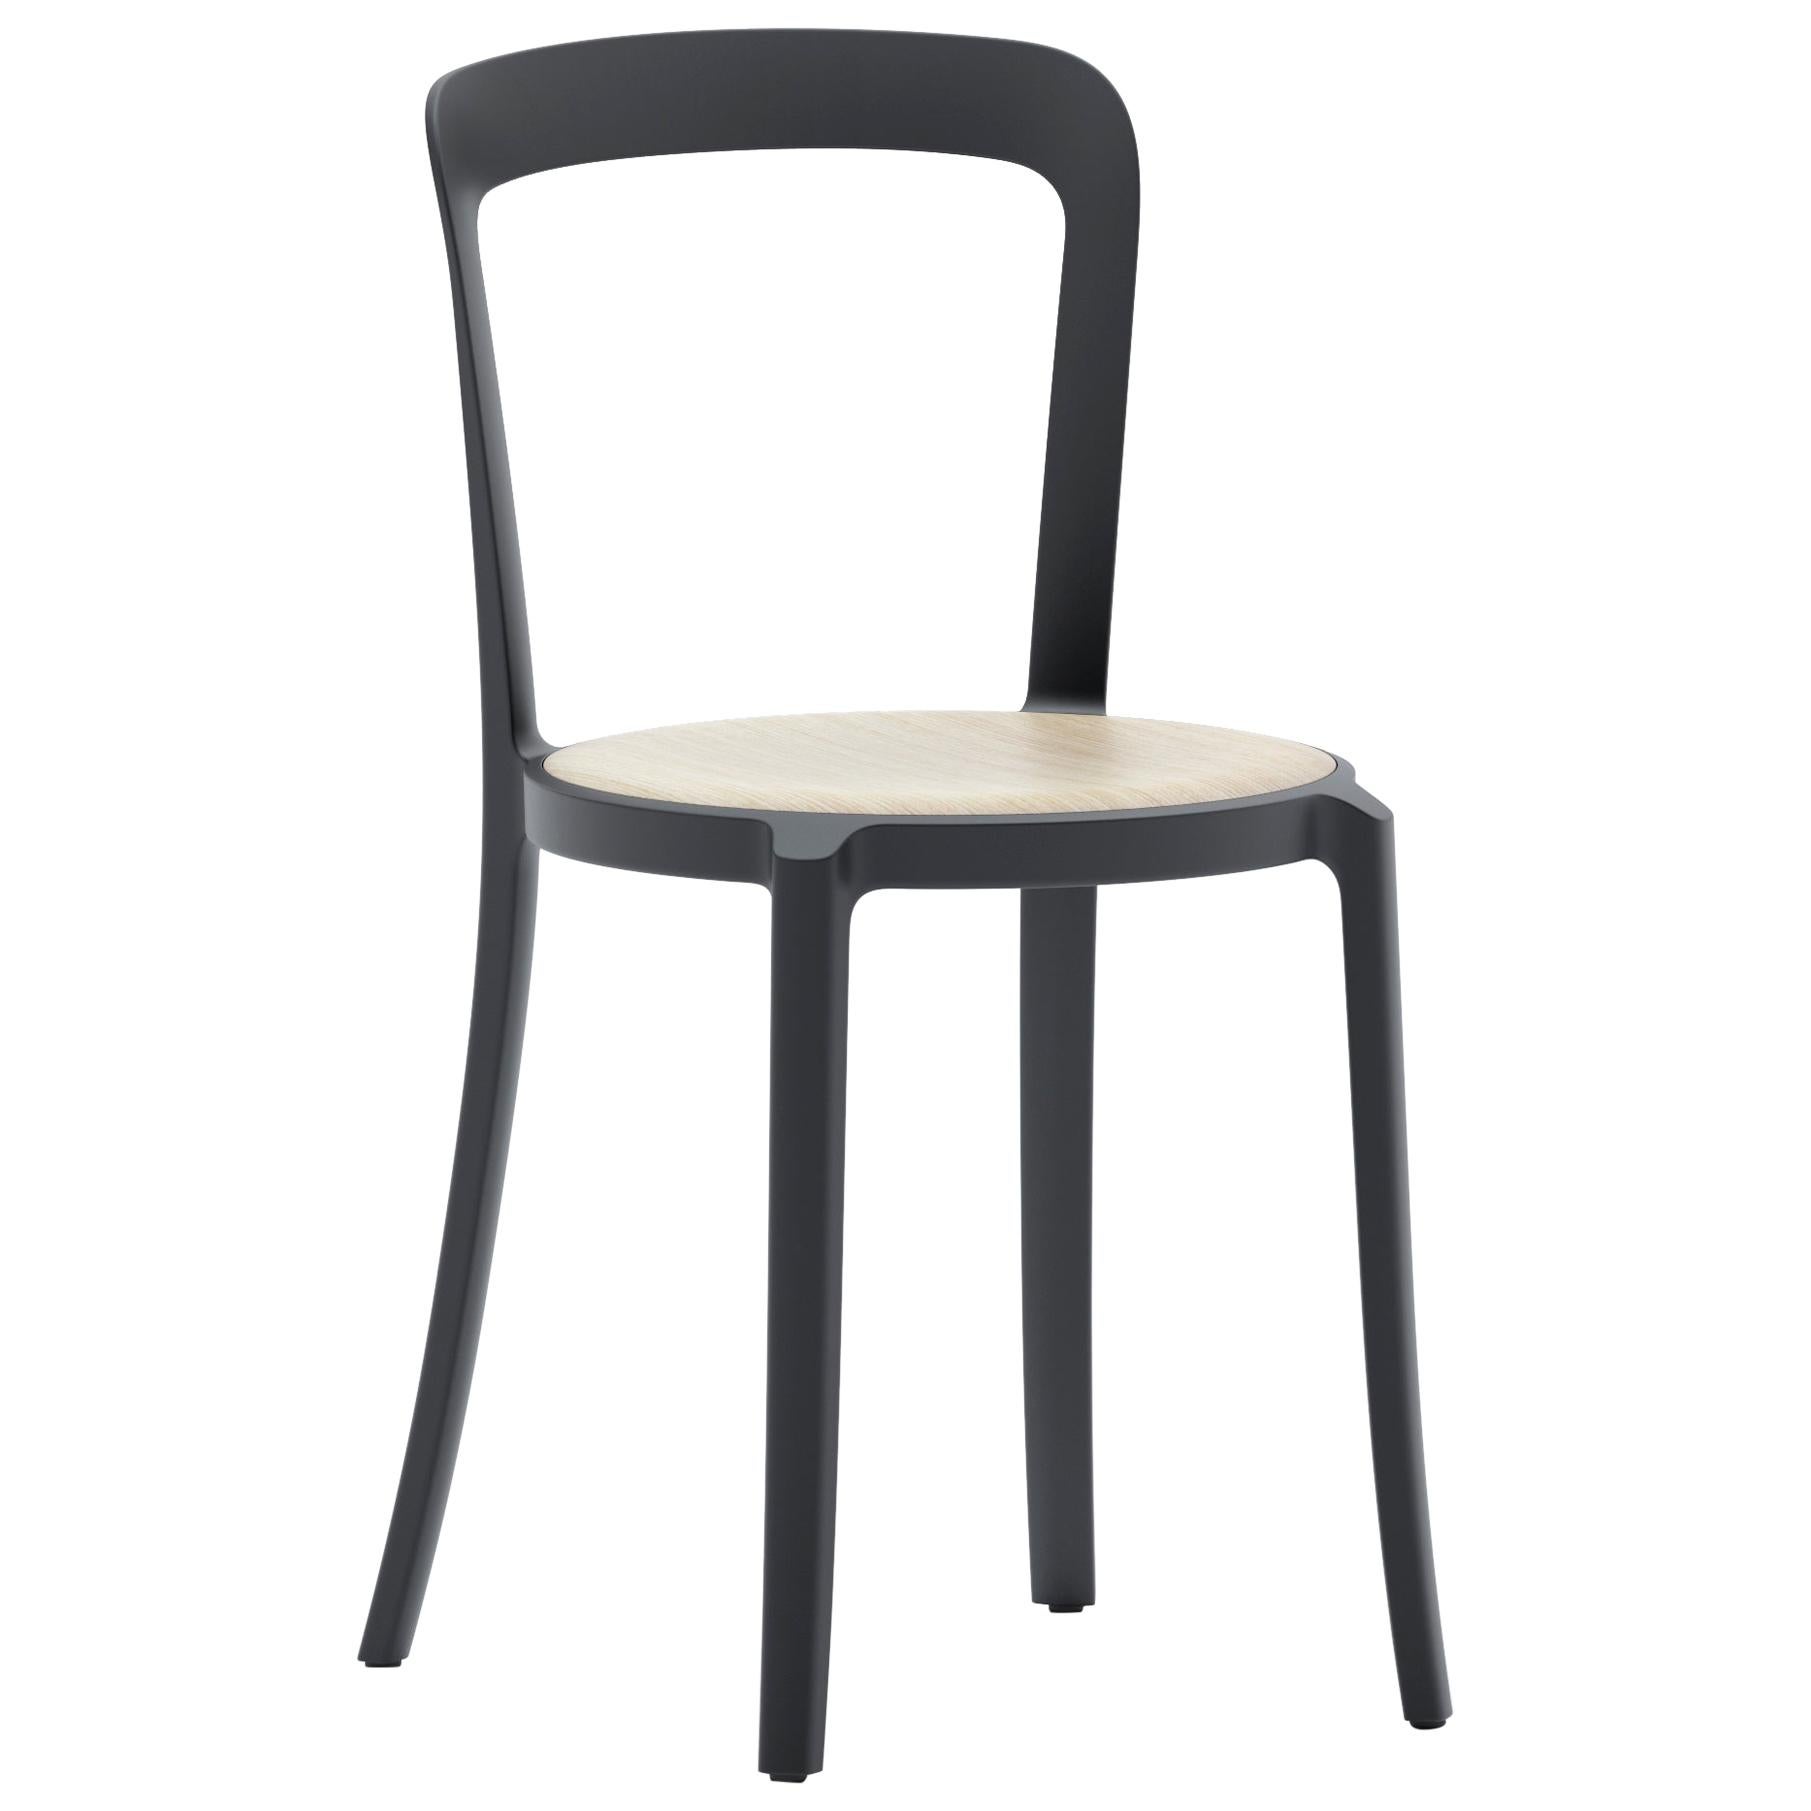 Emeco On & On Stacking Chair in Black with Oak Plywood seat by Barber & Osgerby For Sale